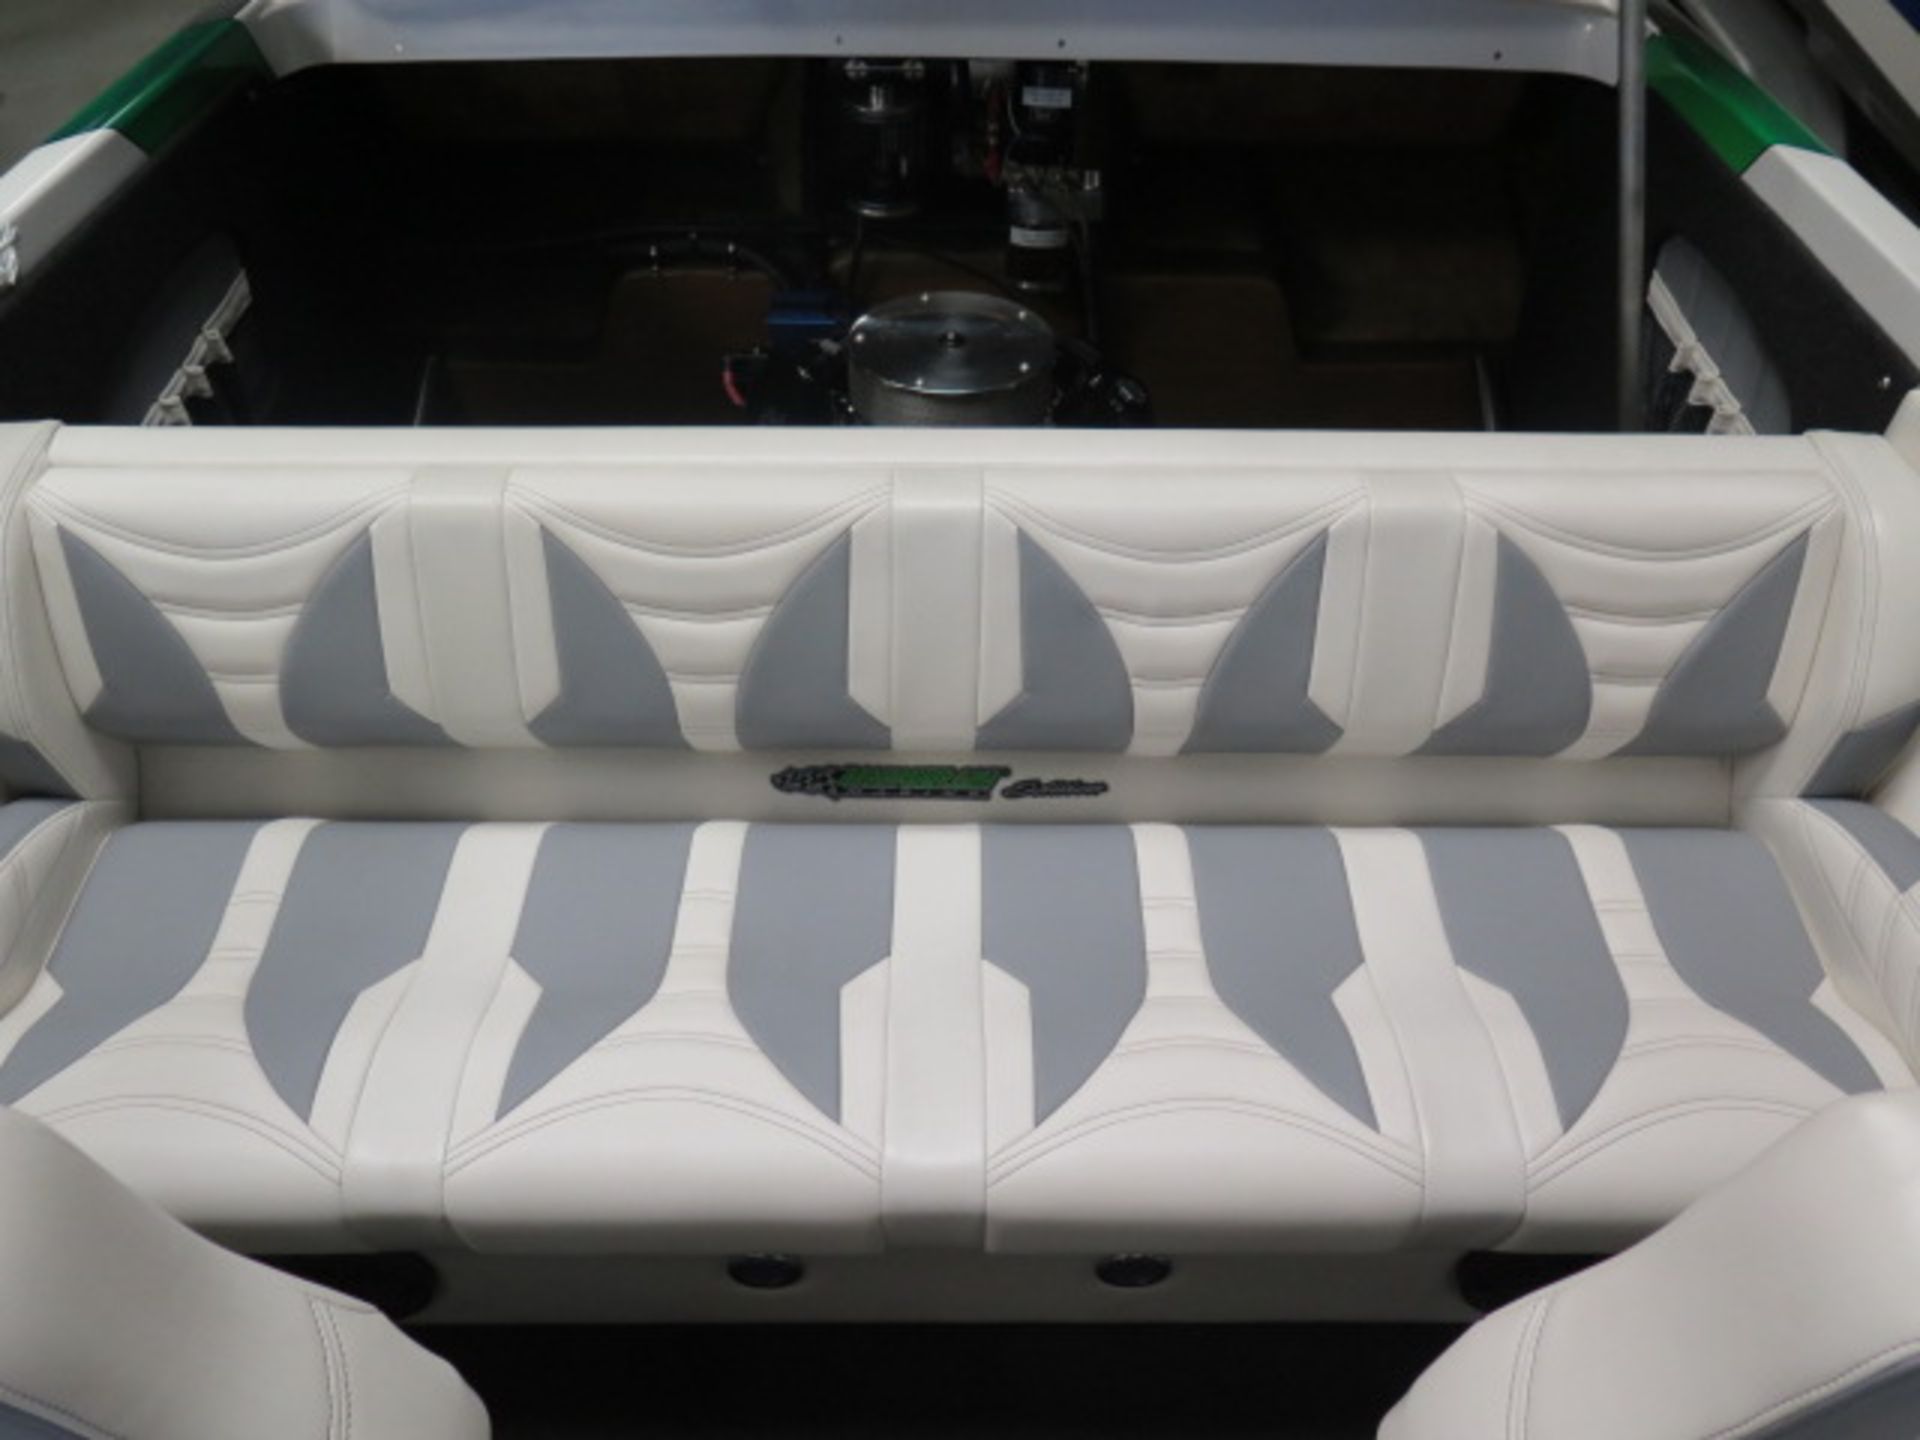 2020 Laveycraft 24' V-Bottom Open Bow Boat w/ Custon Martinez Interior, Boostpower 675Hp, SOLD AS IS - Image 27 of 40